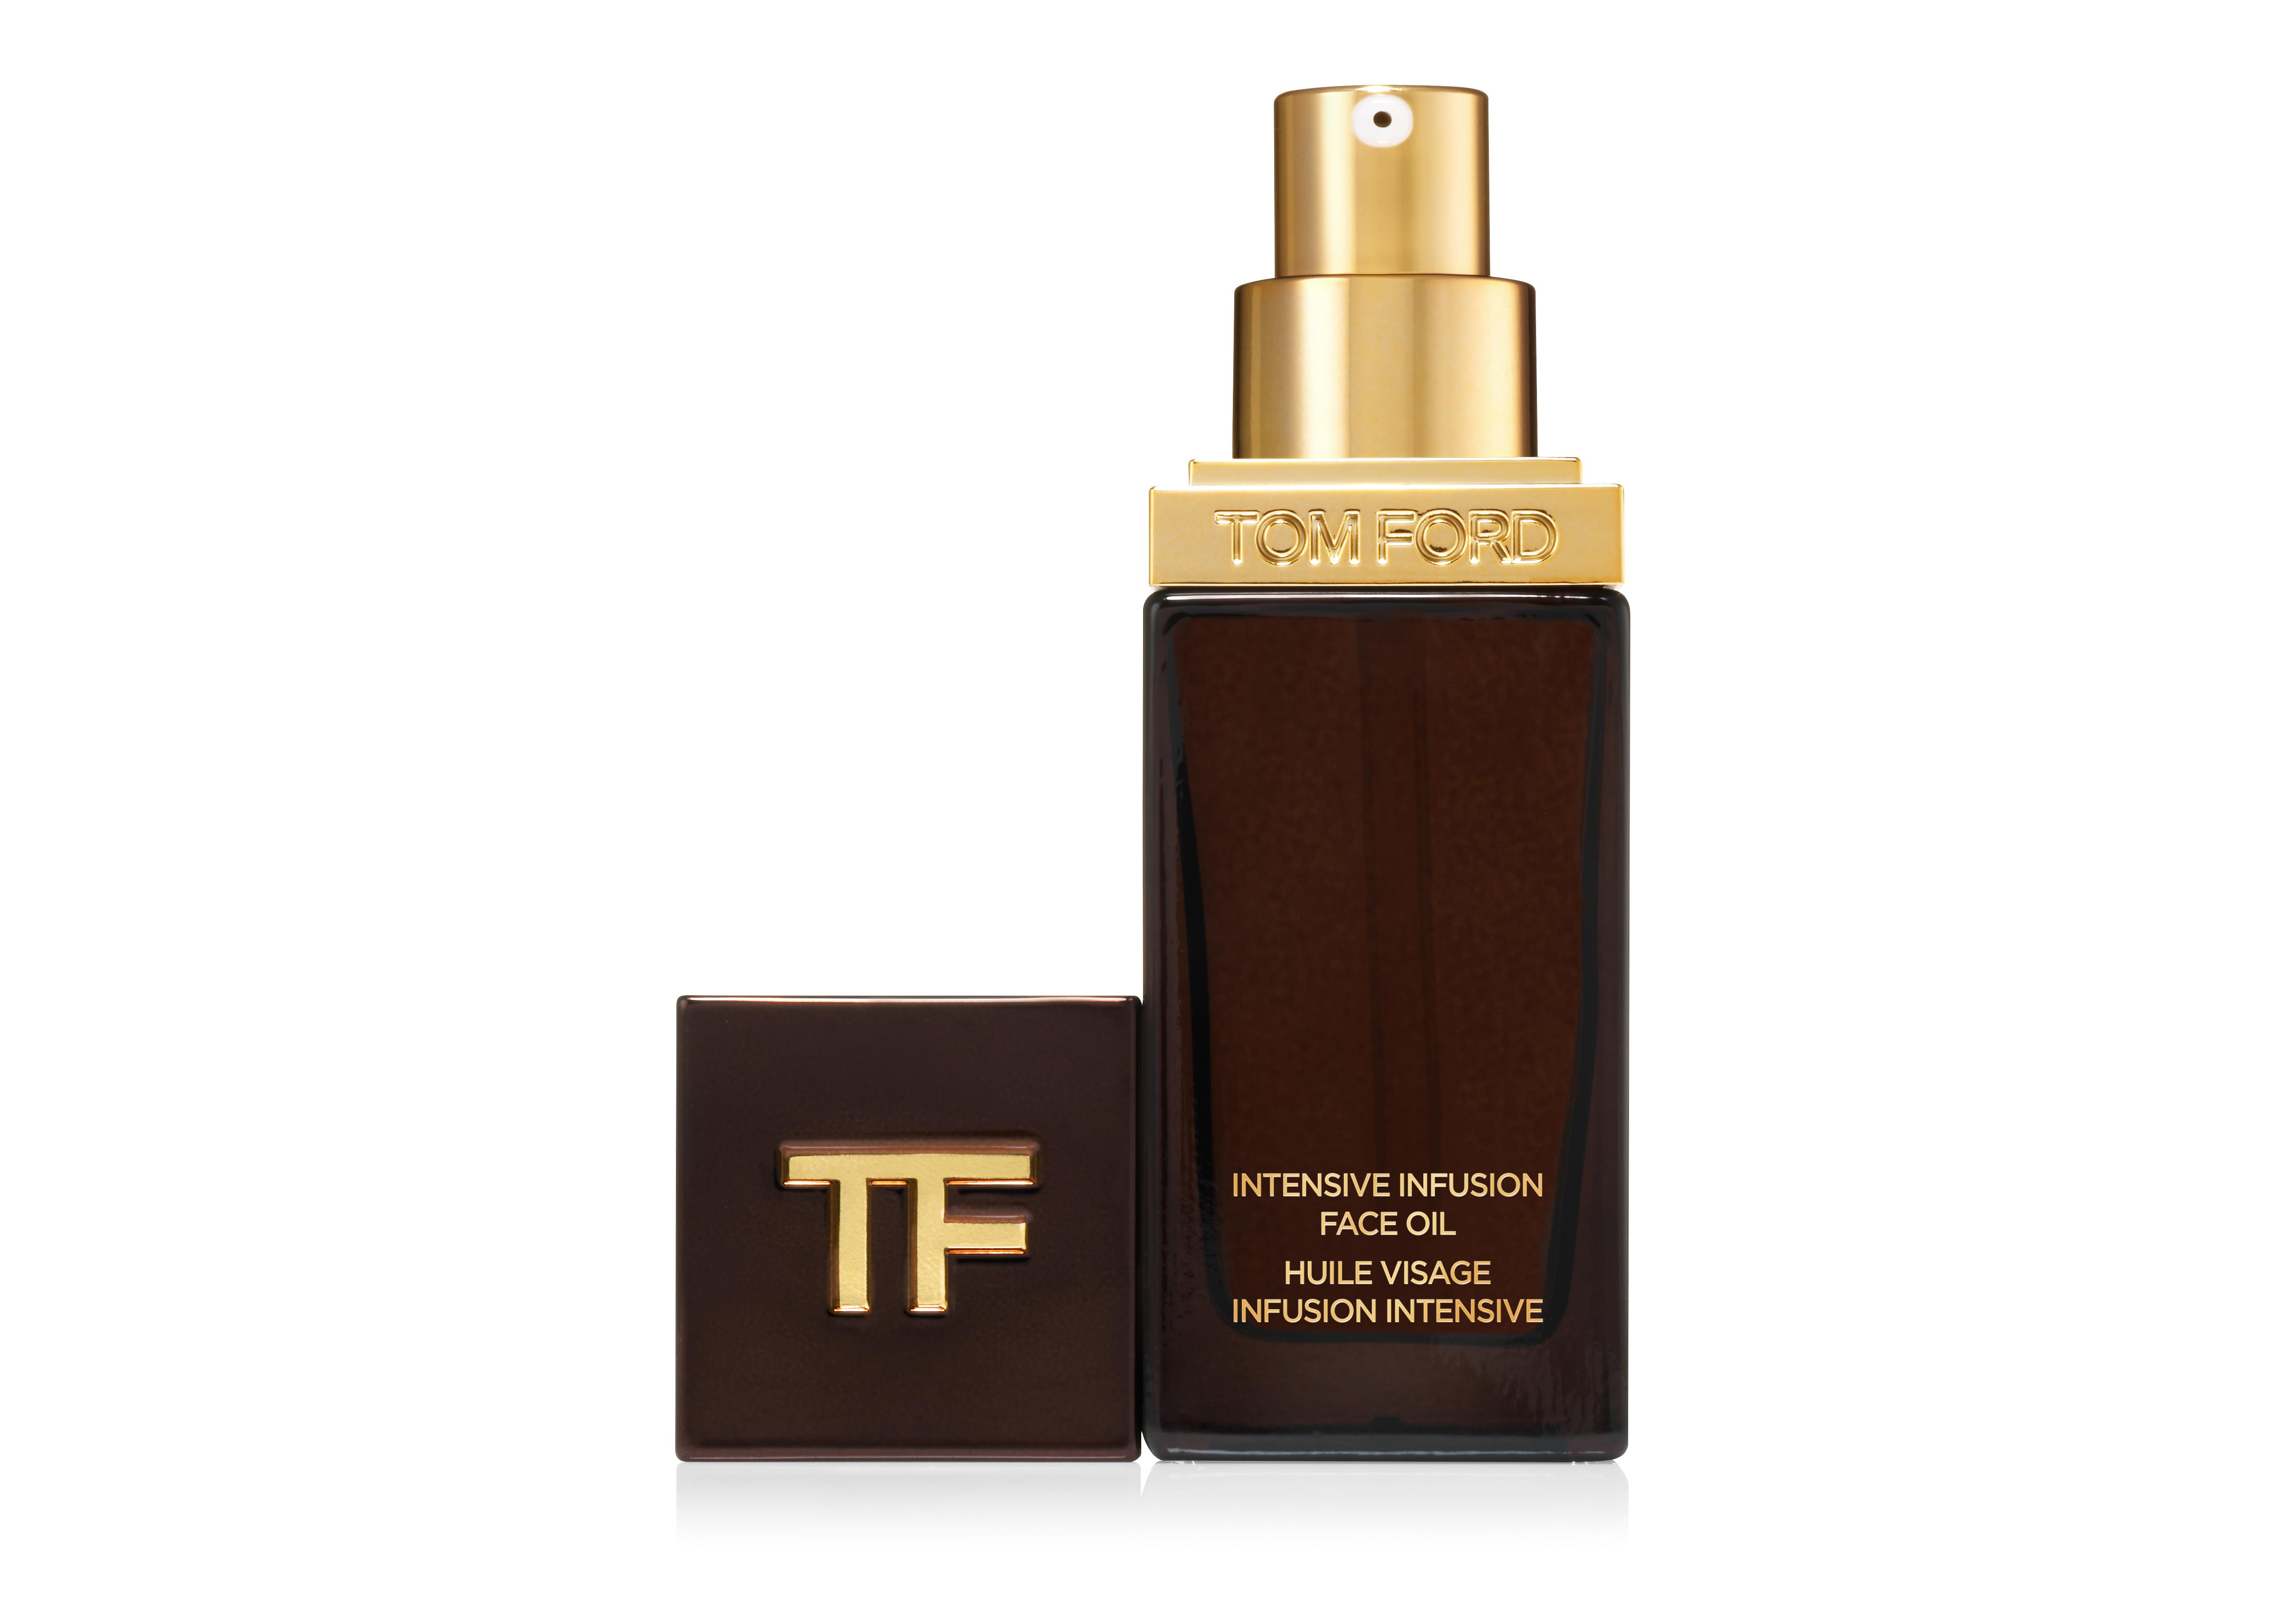 Tom Ford INTENSIVE INFUSION FACE OIL 